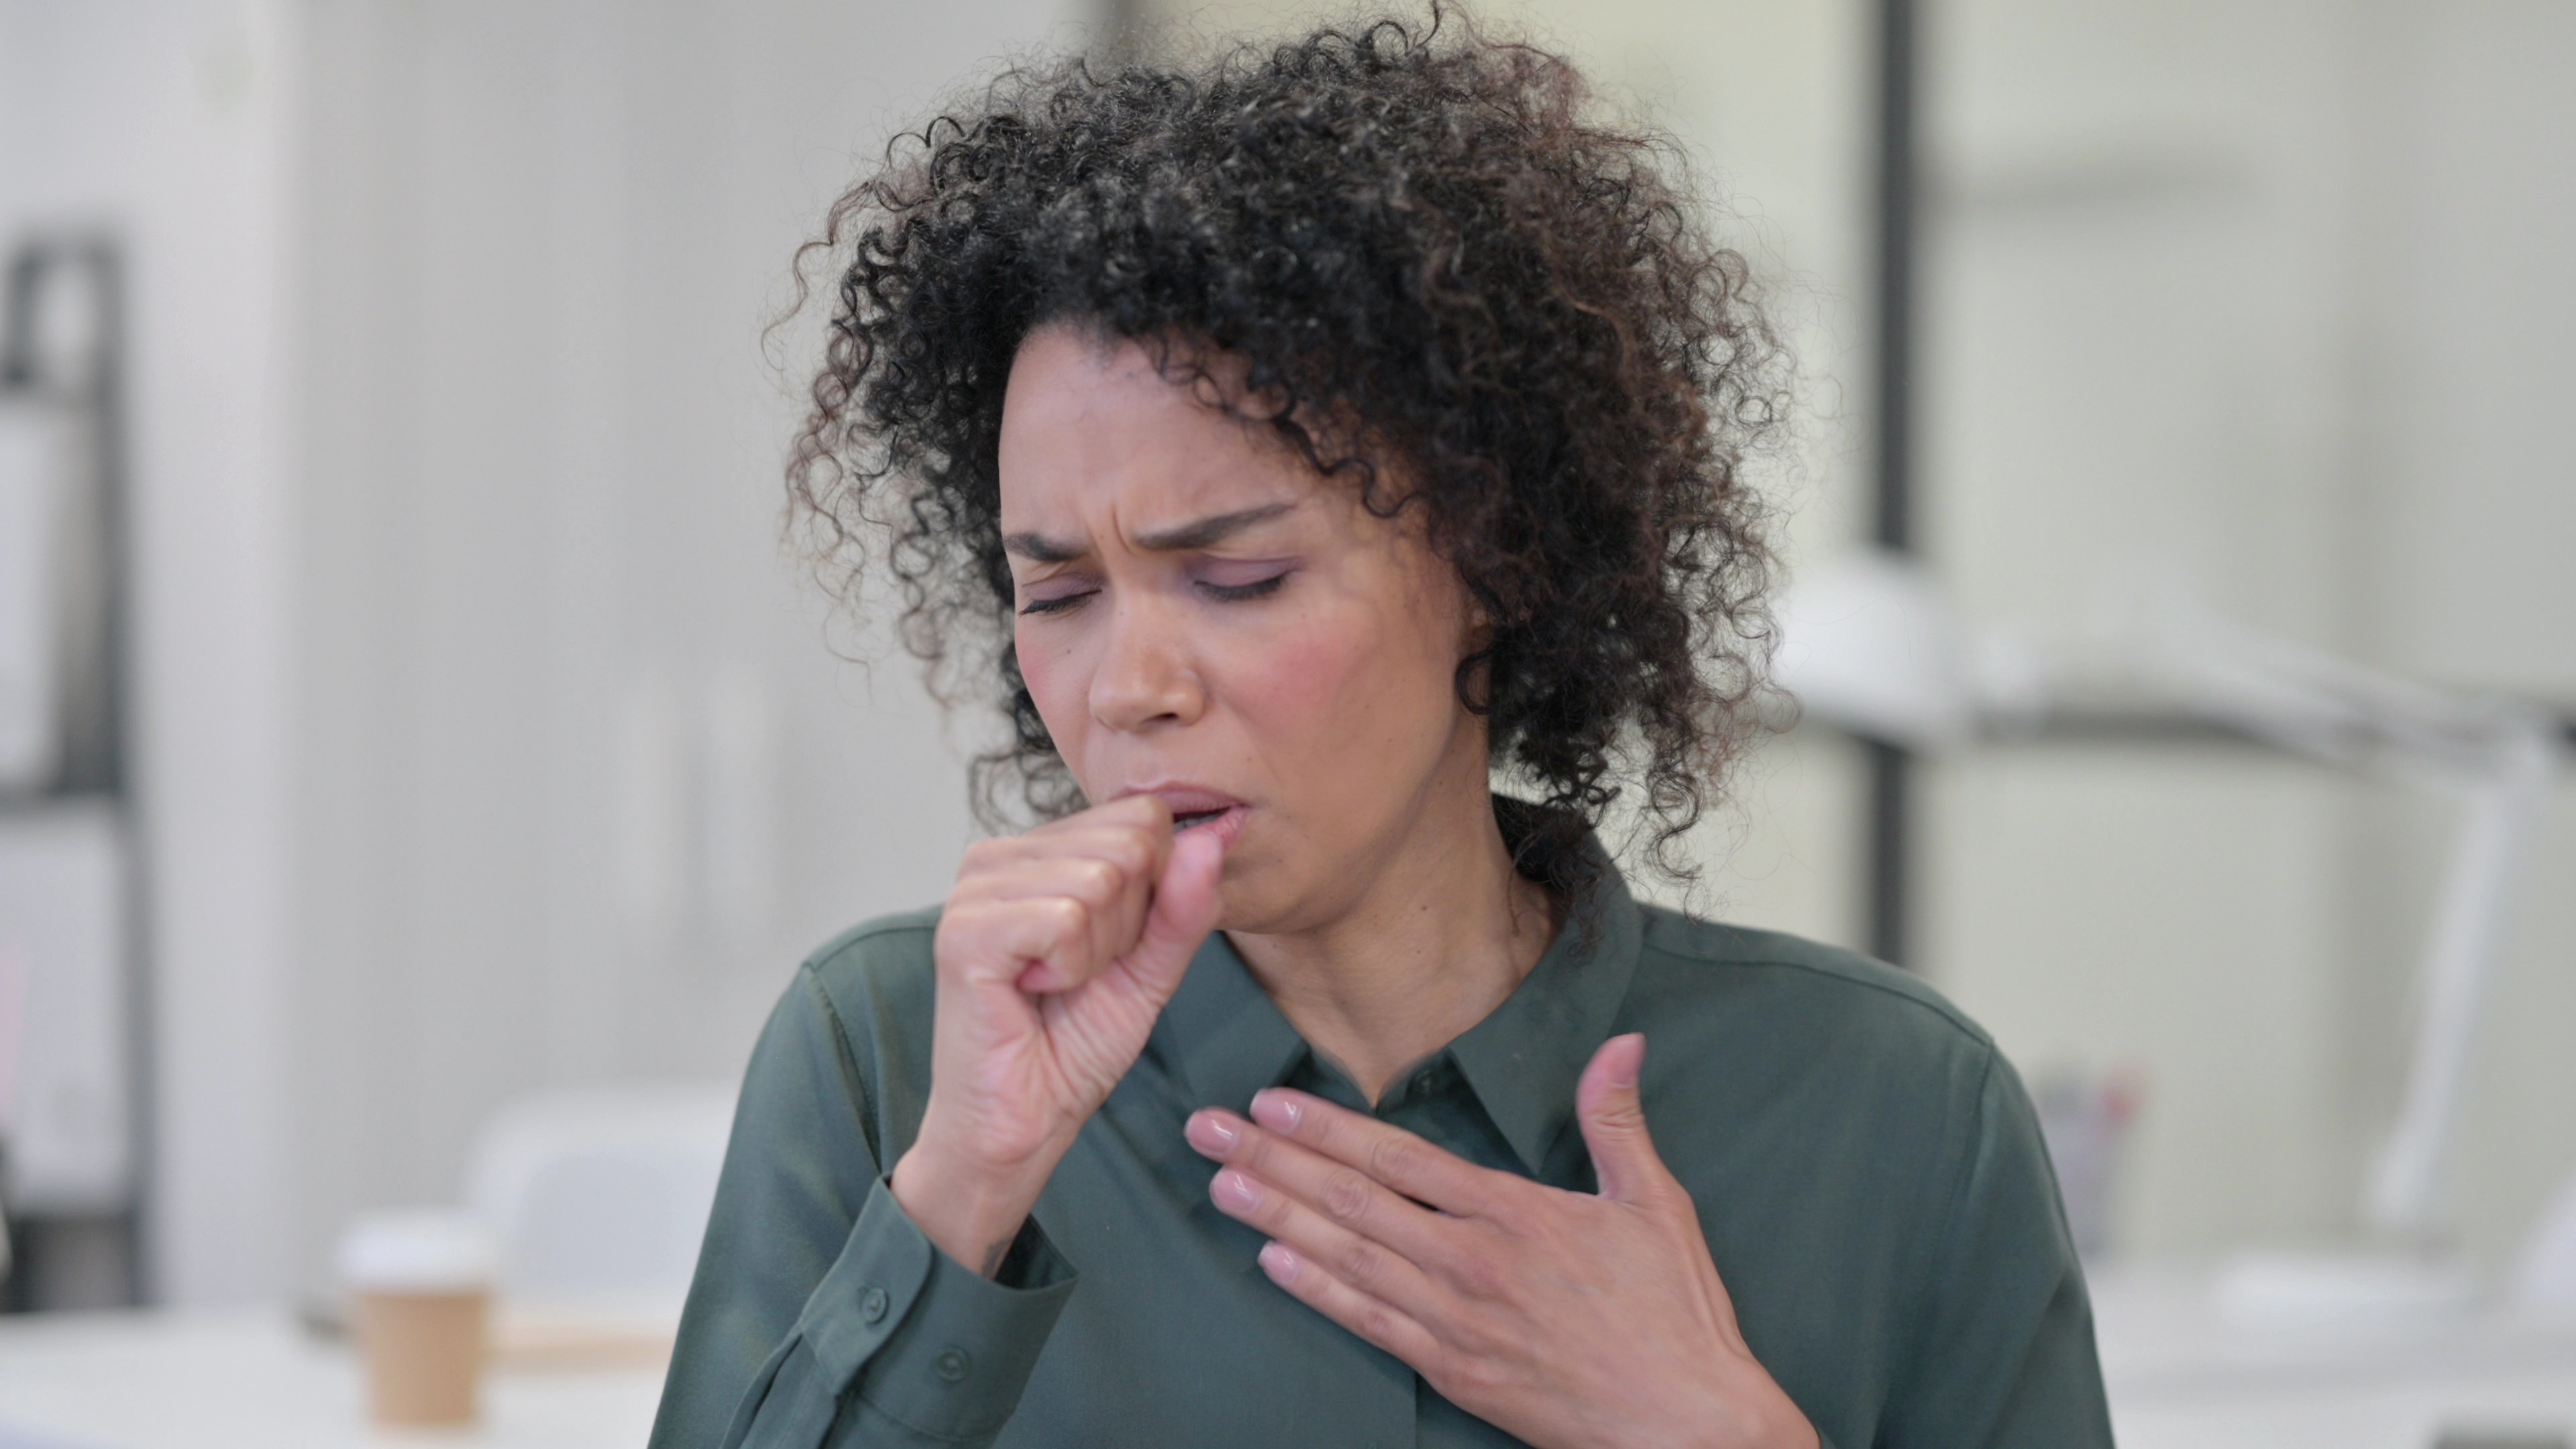 An image of a woman with post nasal drip coughing into her hand.